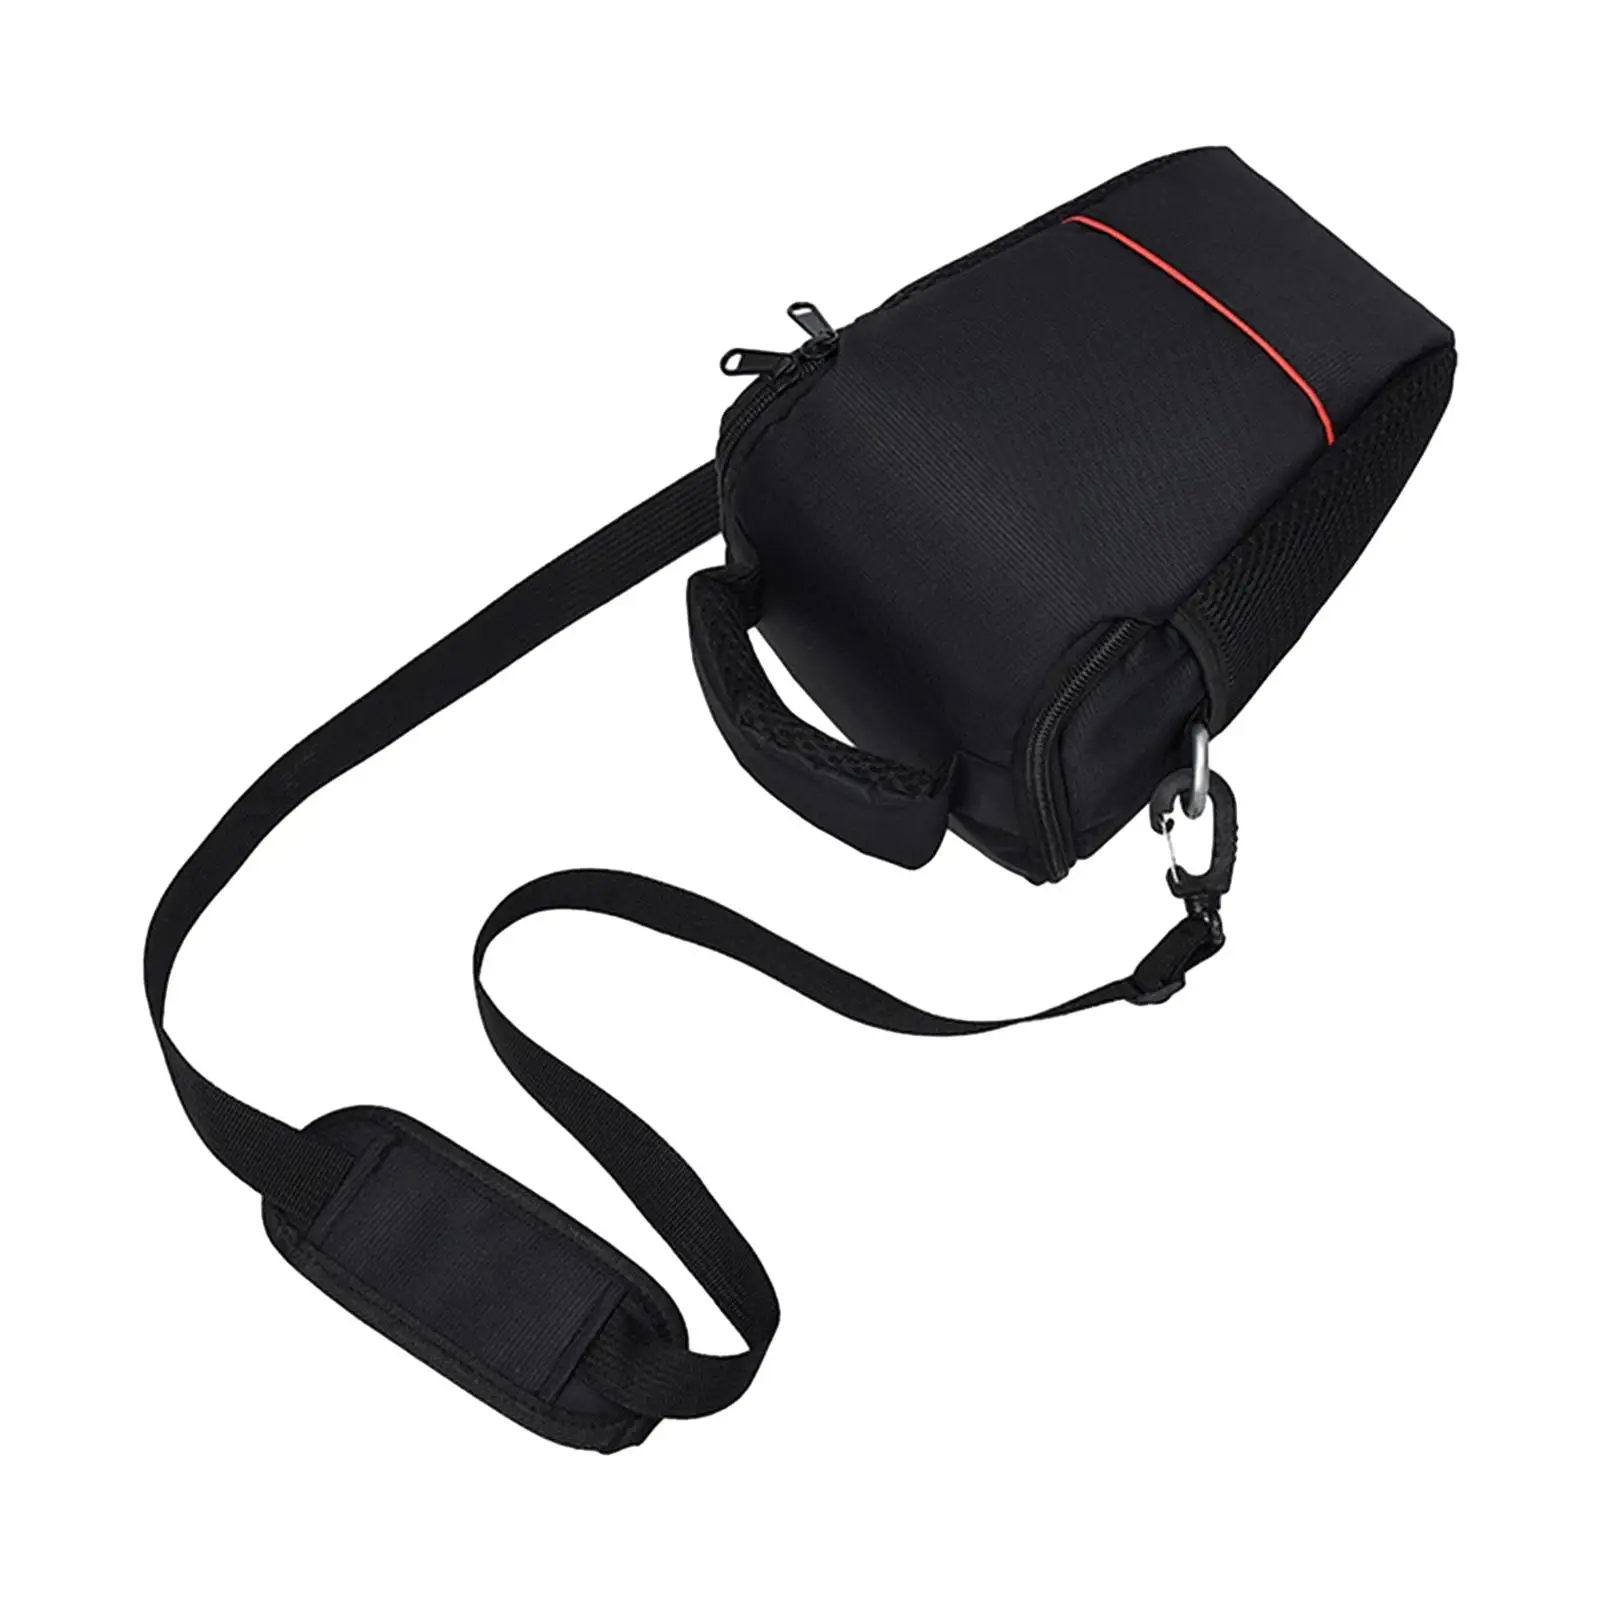 Small Camera Bag Daypack Travel Bag Father`s Day Gift Portable Purse Crossbody Bag for Travel Climbing Hiking Photograph Hunting